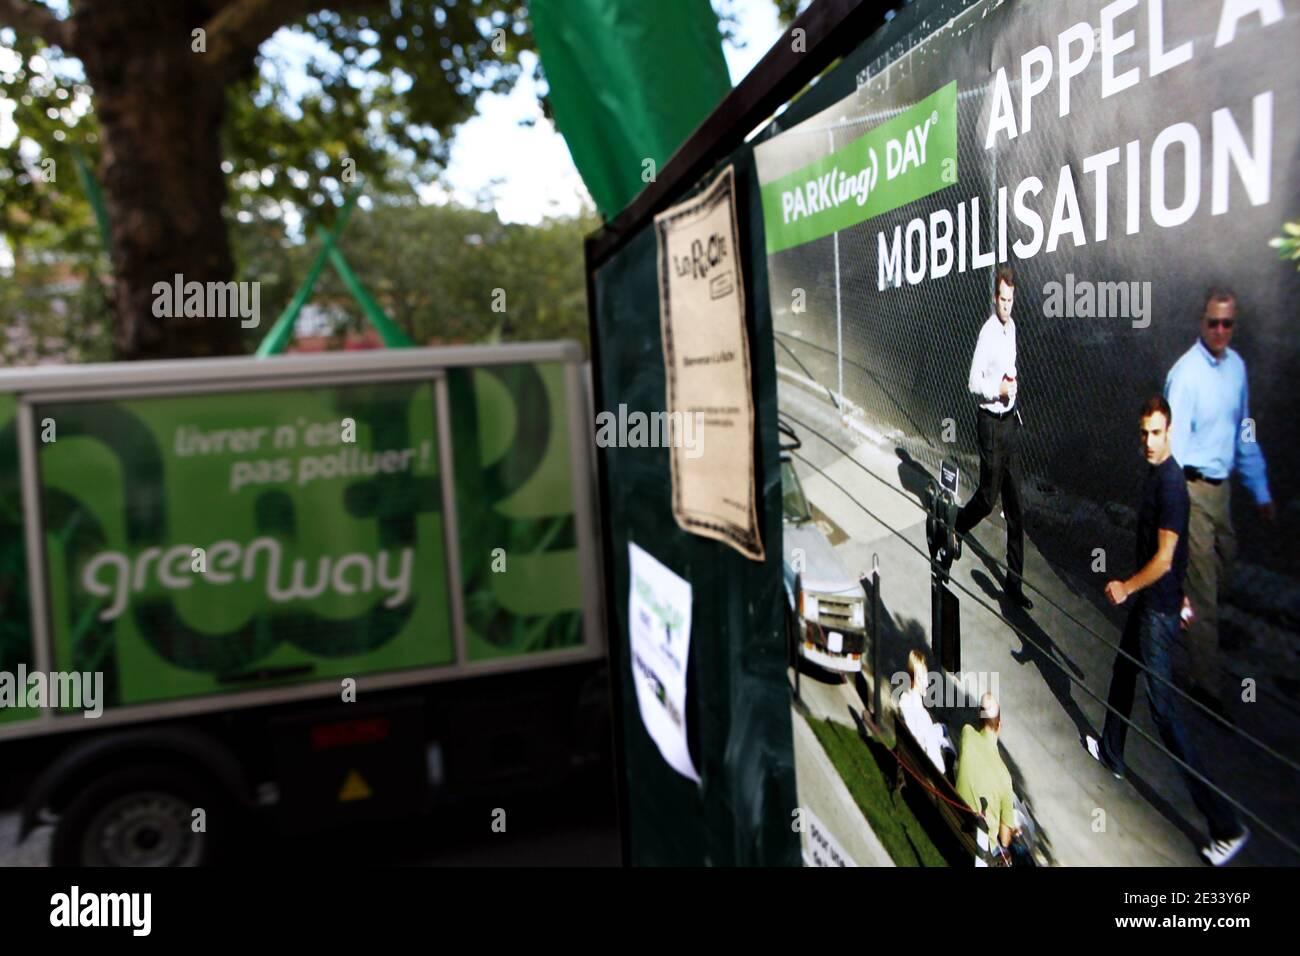 The magazine for sustainable development 'Terra Eco' installed its desks on the streets along the St. Martin canal to mark PARK(ing) Day, in Paris, France on September 17, 2010. PARK(ing) Day is an annual, worldwide event that inspires city dwellers everywhere to transform metered parking spots into temporary parks for the public good. Photo by Stephane Lemouton/ABACAPRESS.COM Stock Photo